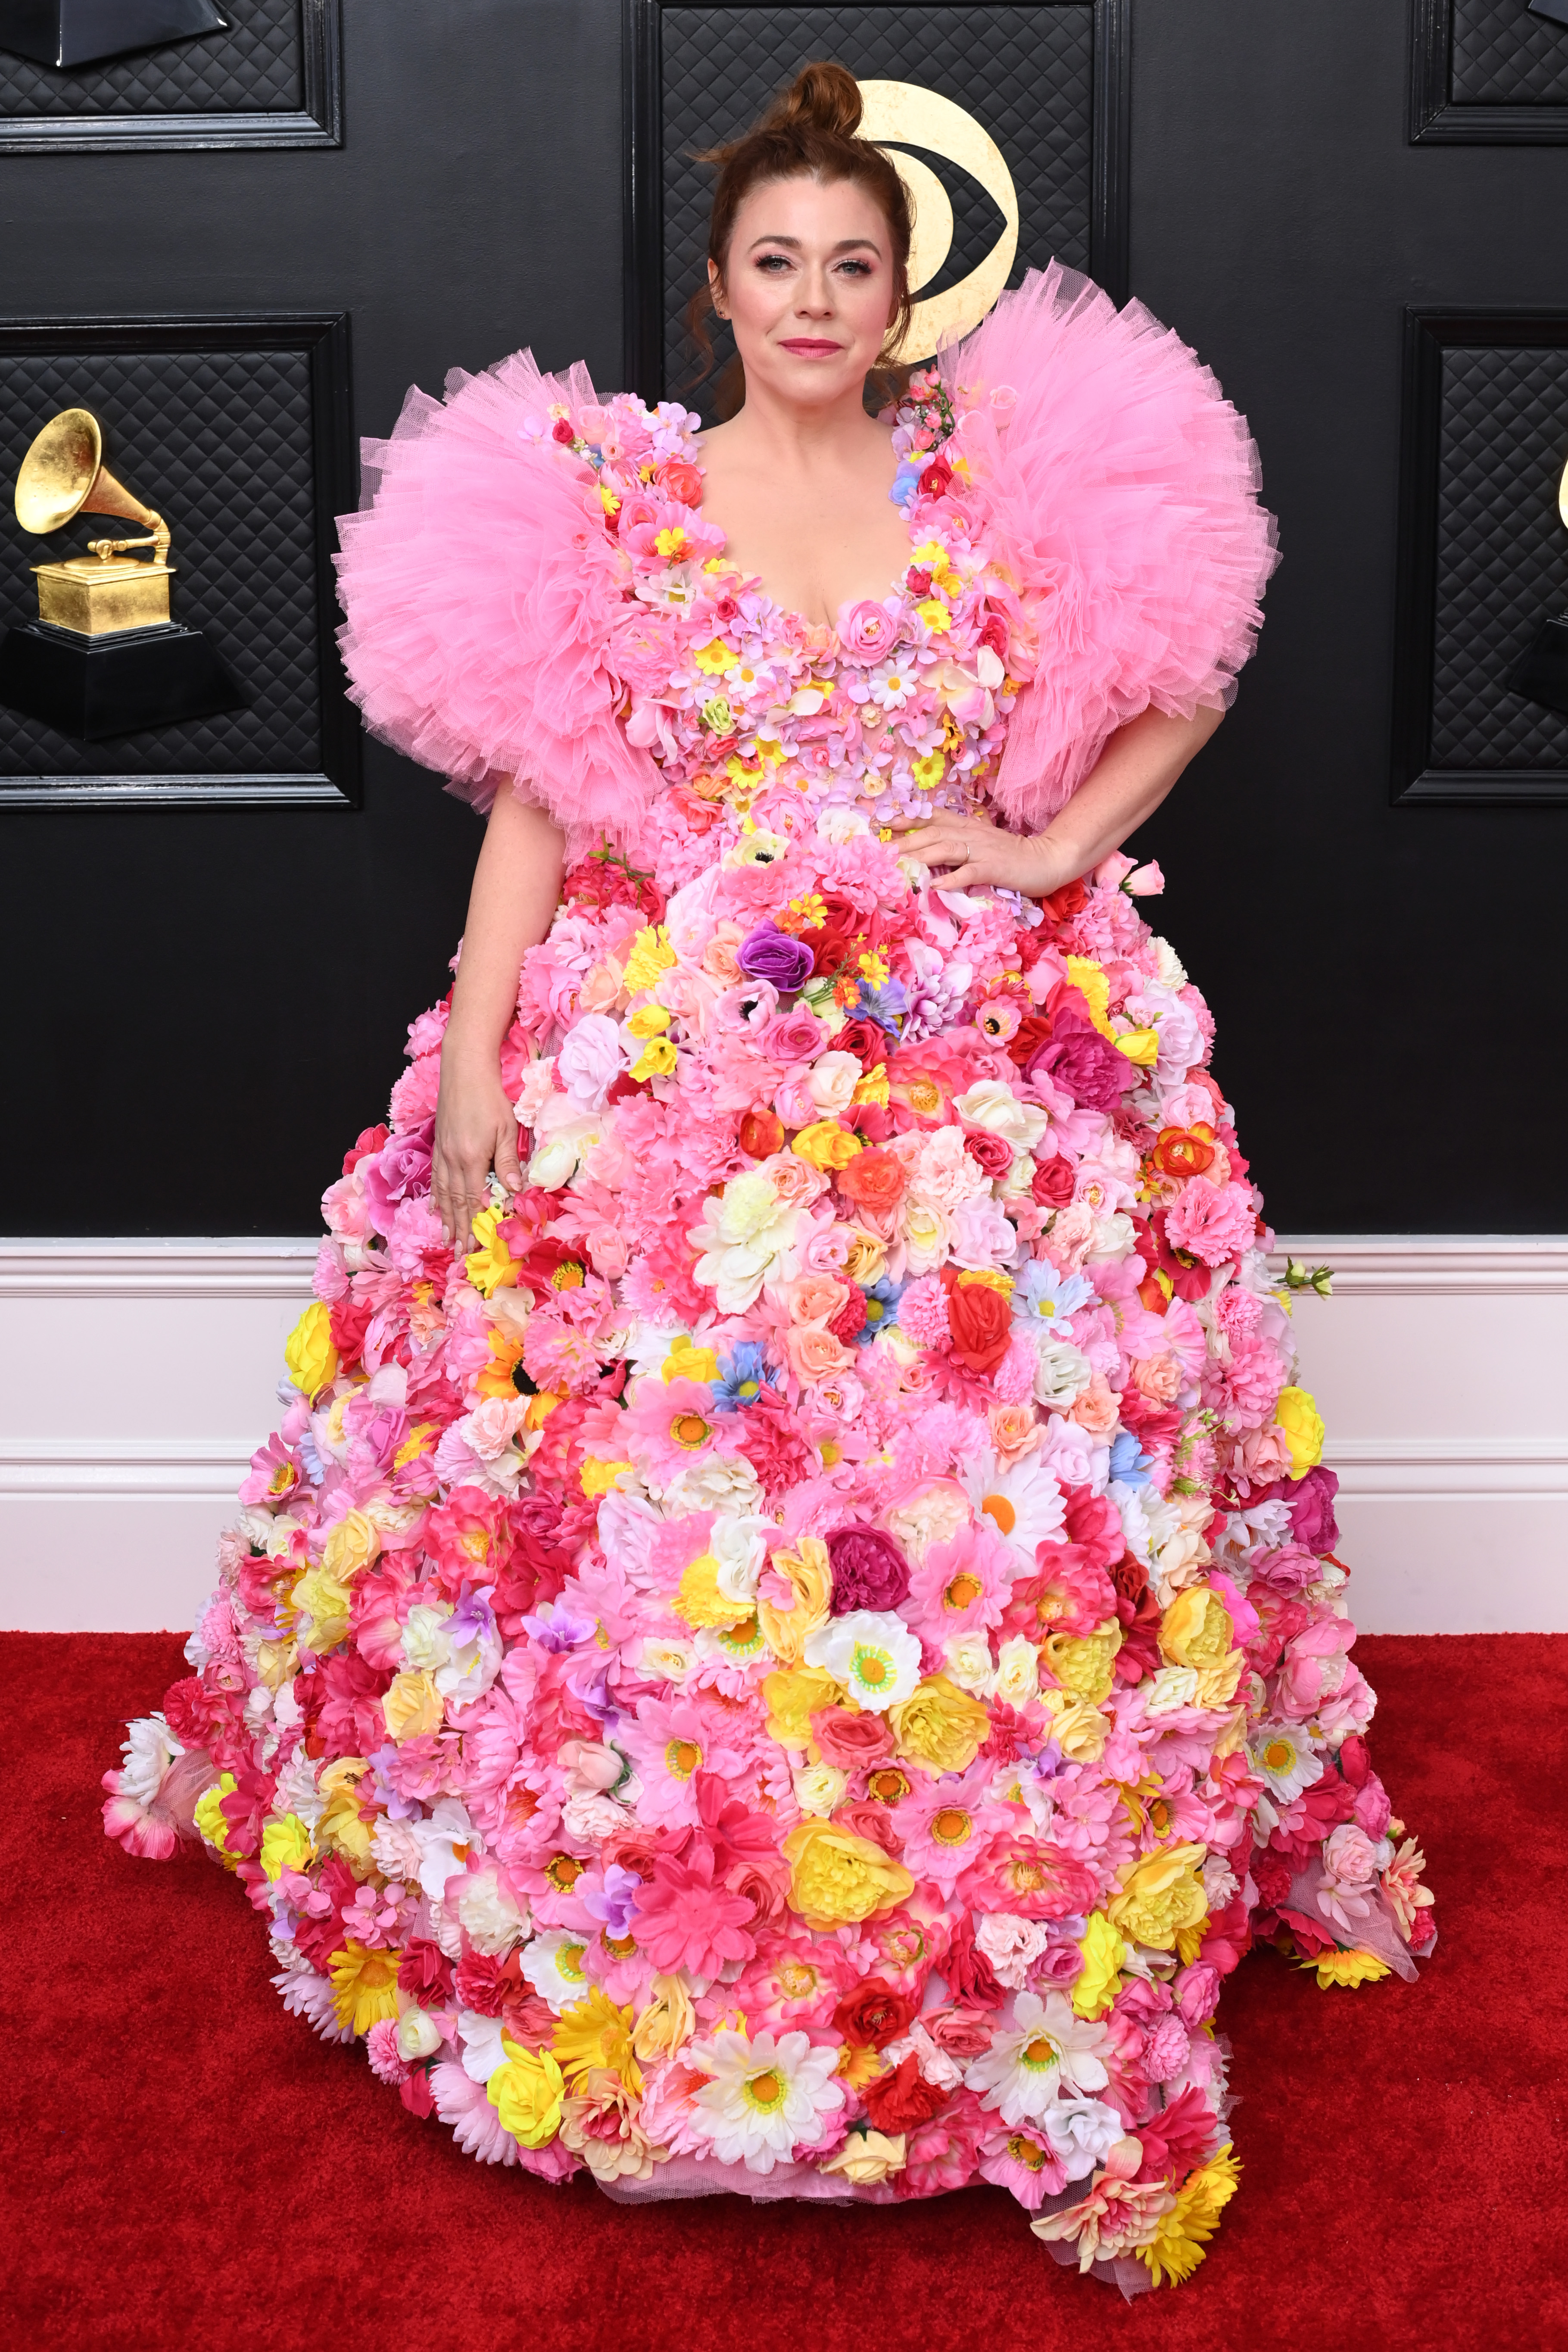 13 of the wildest outfits celebrities wore at the 2021 Grammys